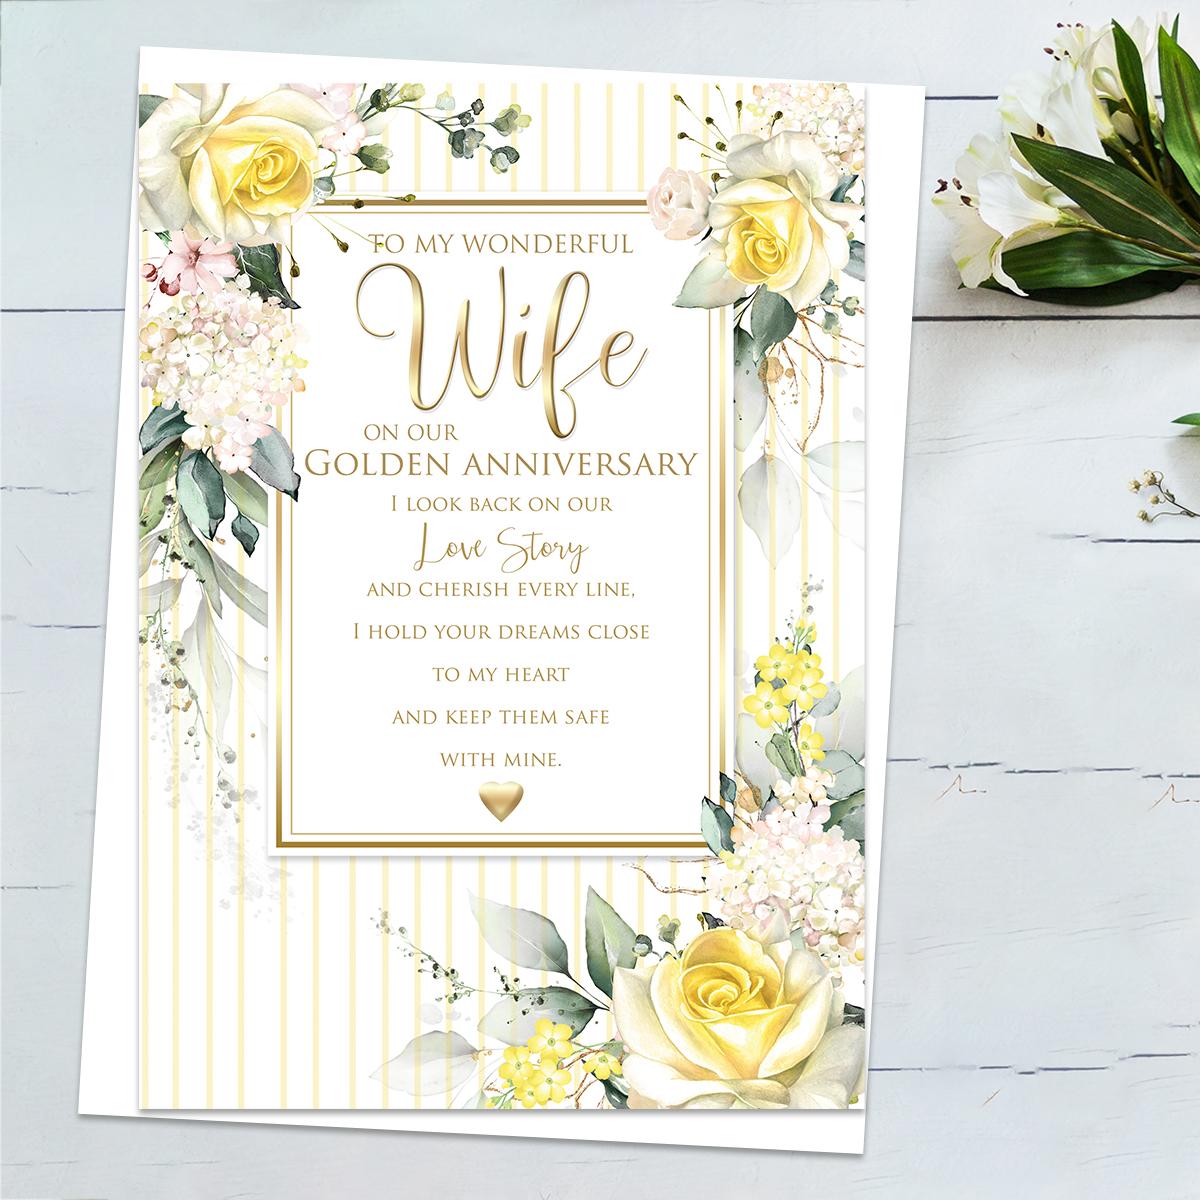 ' To My Beautiful Wife On Our Golden Anniversary' Featuring White Hydrangea And Lemon Roses With gold Foiled Detail And Heartfelt words. Complete With White Envelope